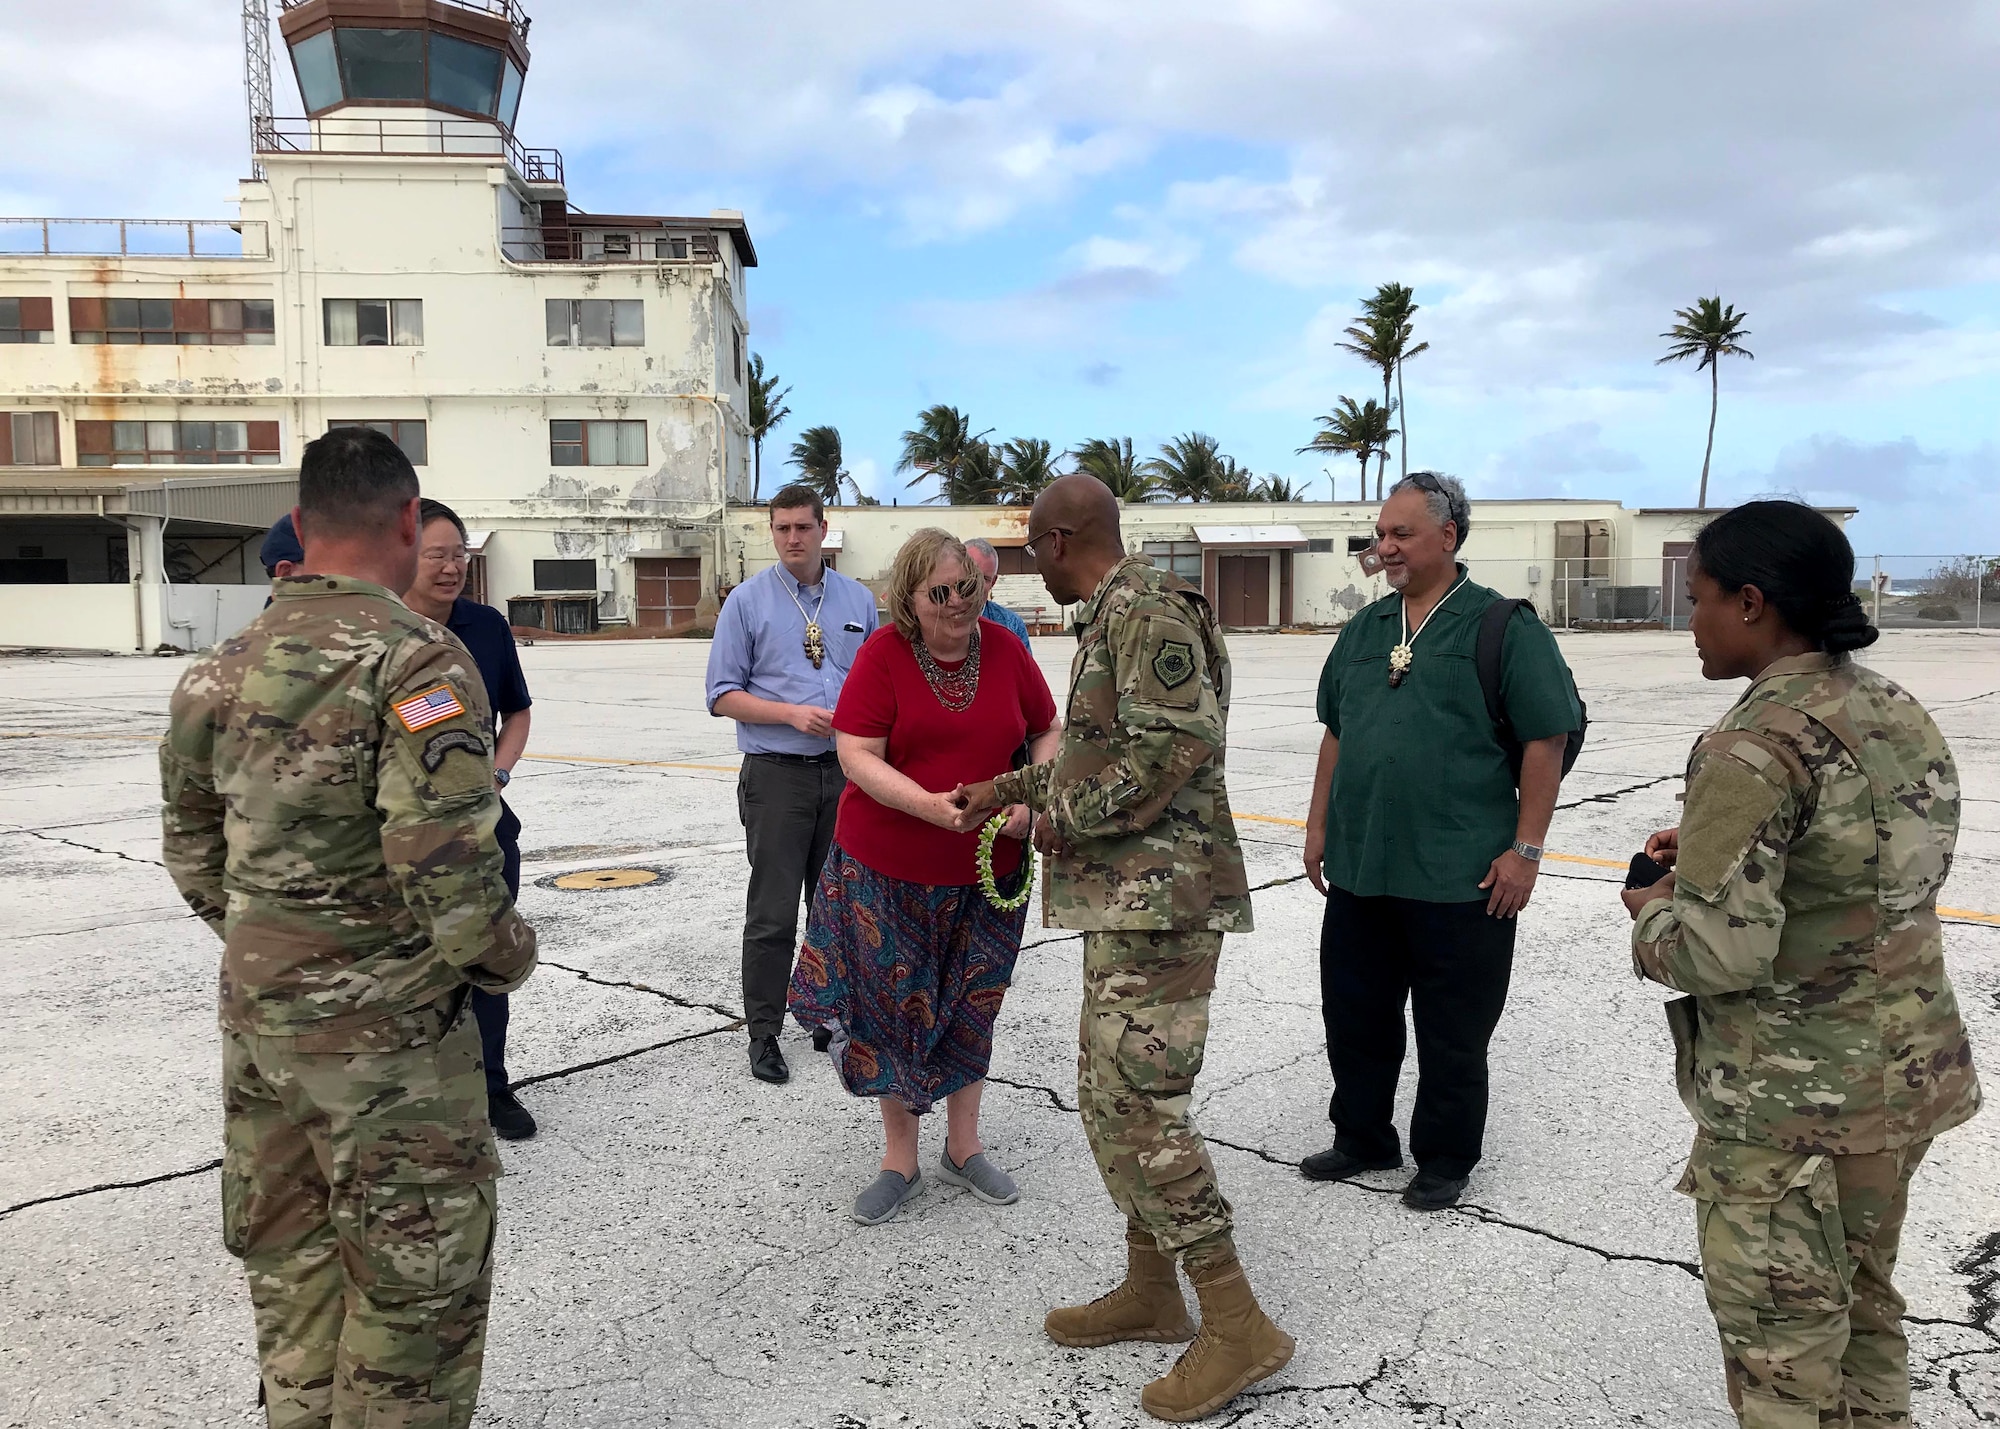 Gen. CQ Brown, Jr., Pacific Air Forces commander, greets Ambassador Karen Stewart, U.S. Ambassador to the Republic of the Marshall Islands, at Bucholz Army Airfield, Kwajalein Atoll, Republic of the Marshall Islands, Feb. 20, 2019.